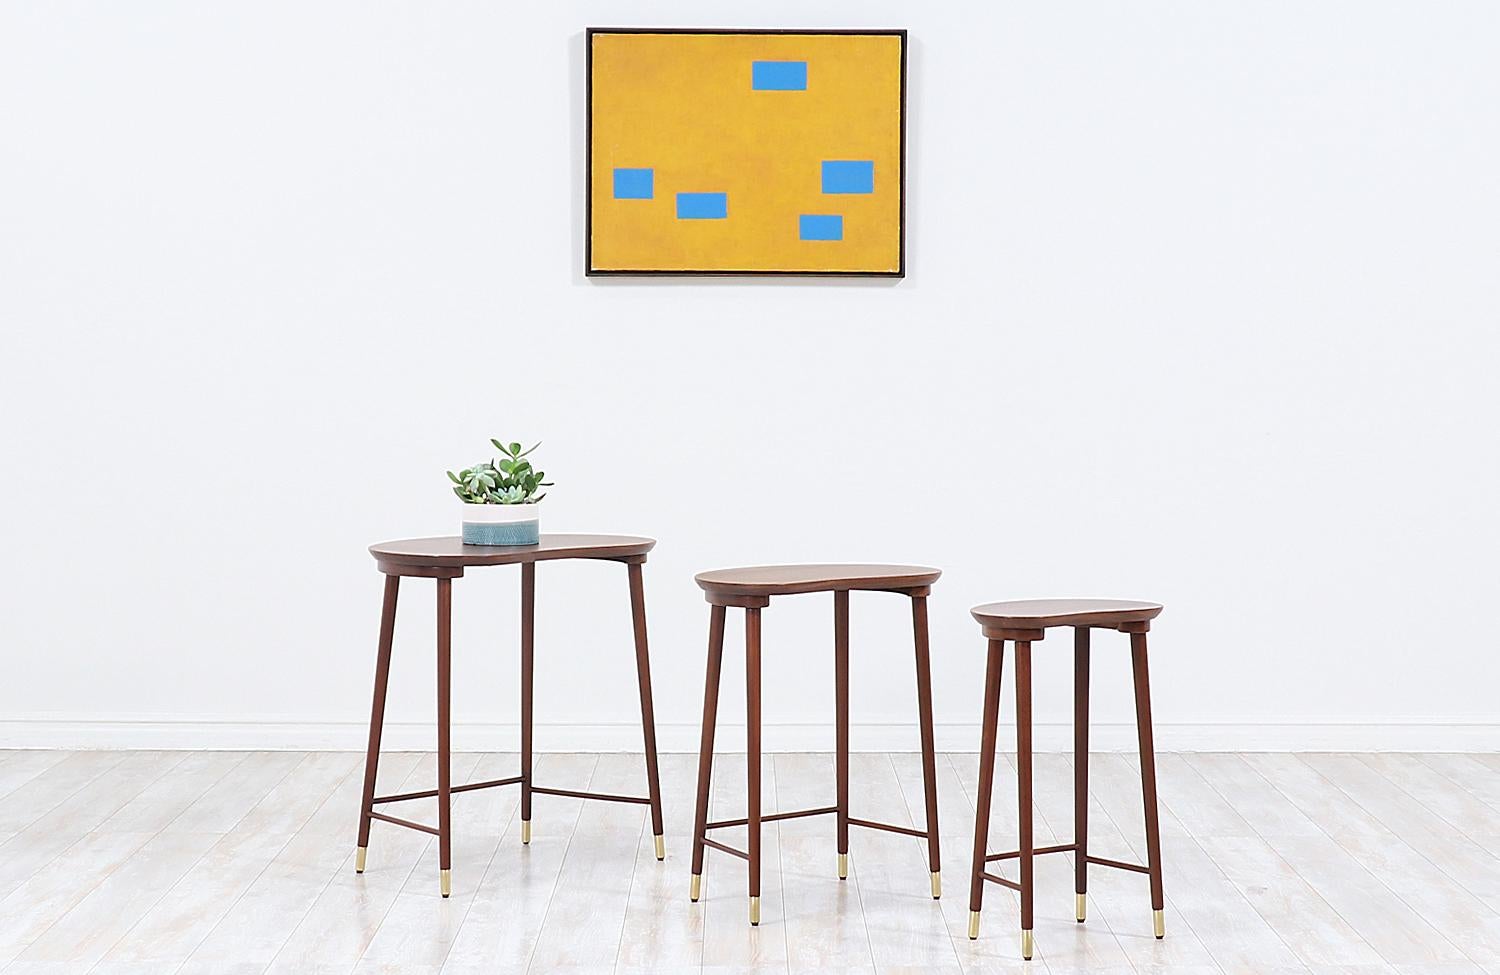 Versatile set of three nesting tables designed by Danish designer Edmund Jørgensen in collaboration with Danish company, Møbelfabriken Gorm, who operated in the city of Aarhus in the 1950s. Our tables feature kidney shape mahogany tabletops and